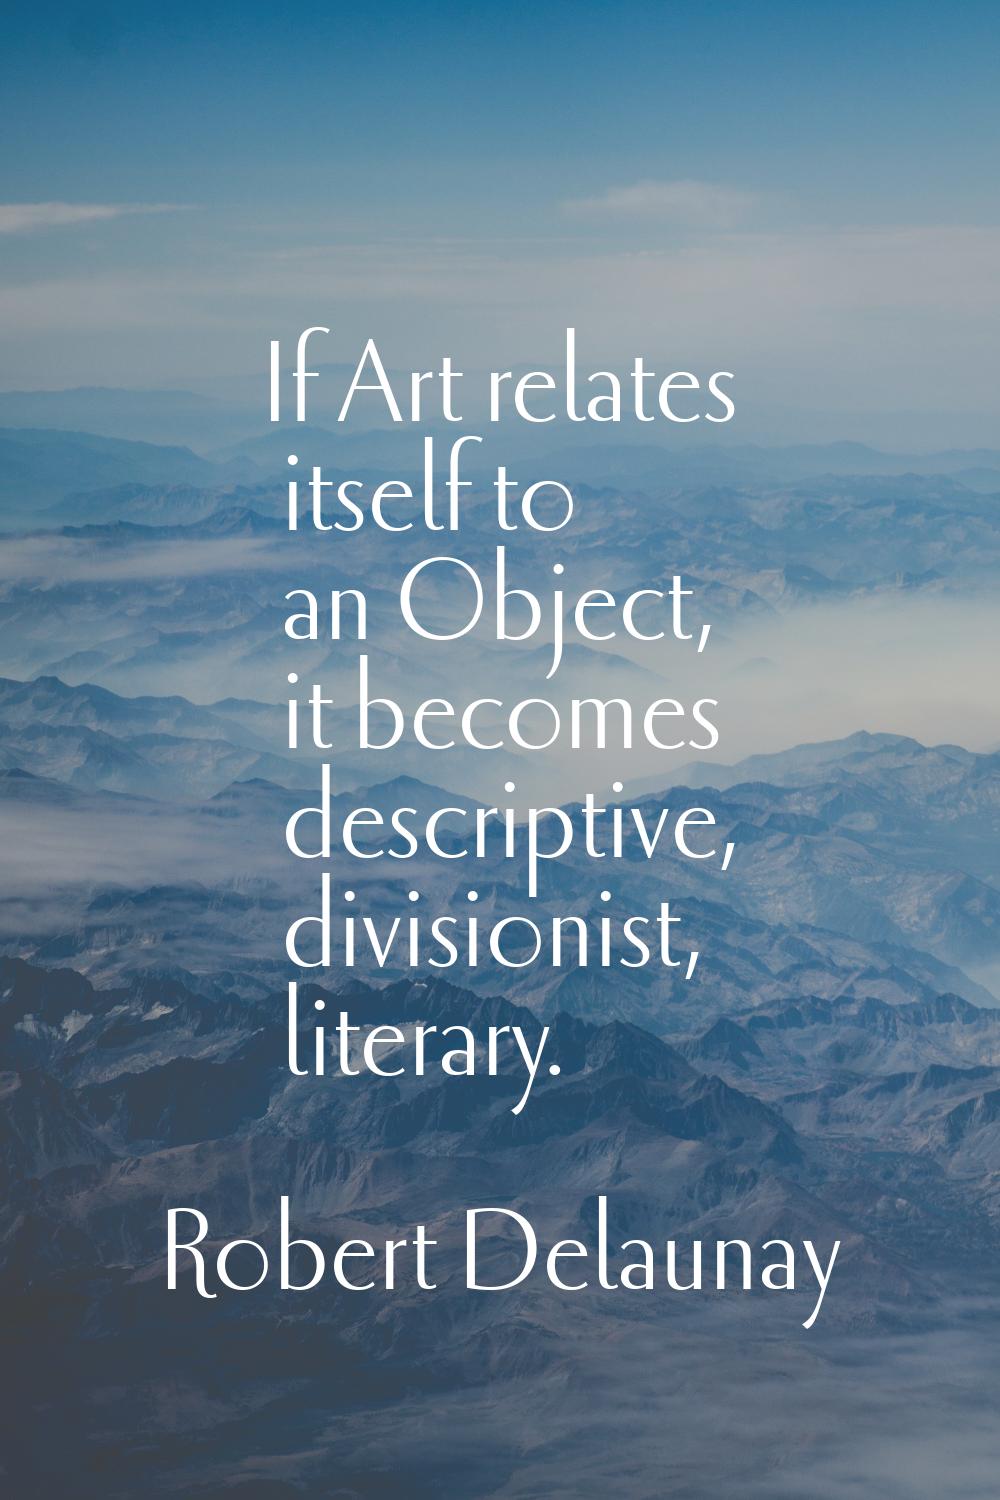 If Art relates itself to an Object, it becomes descriptive, divisionist, literary.